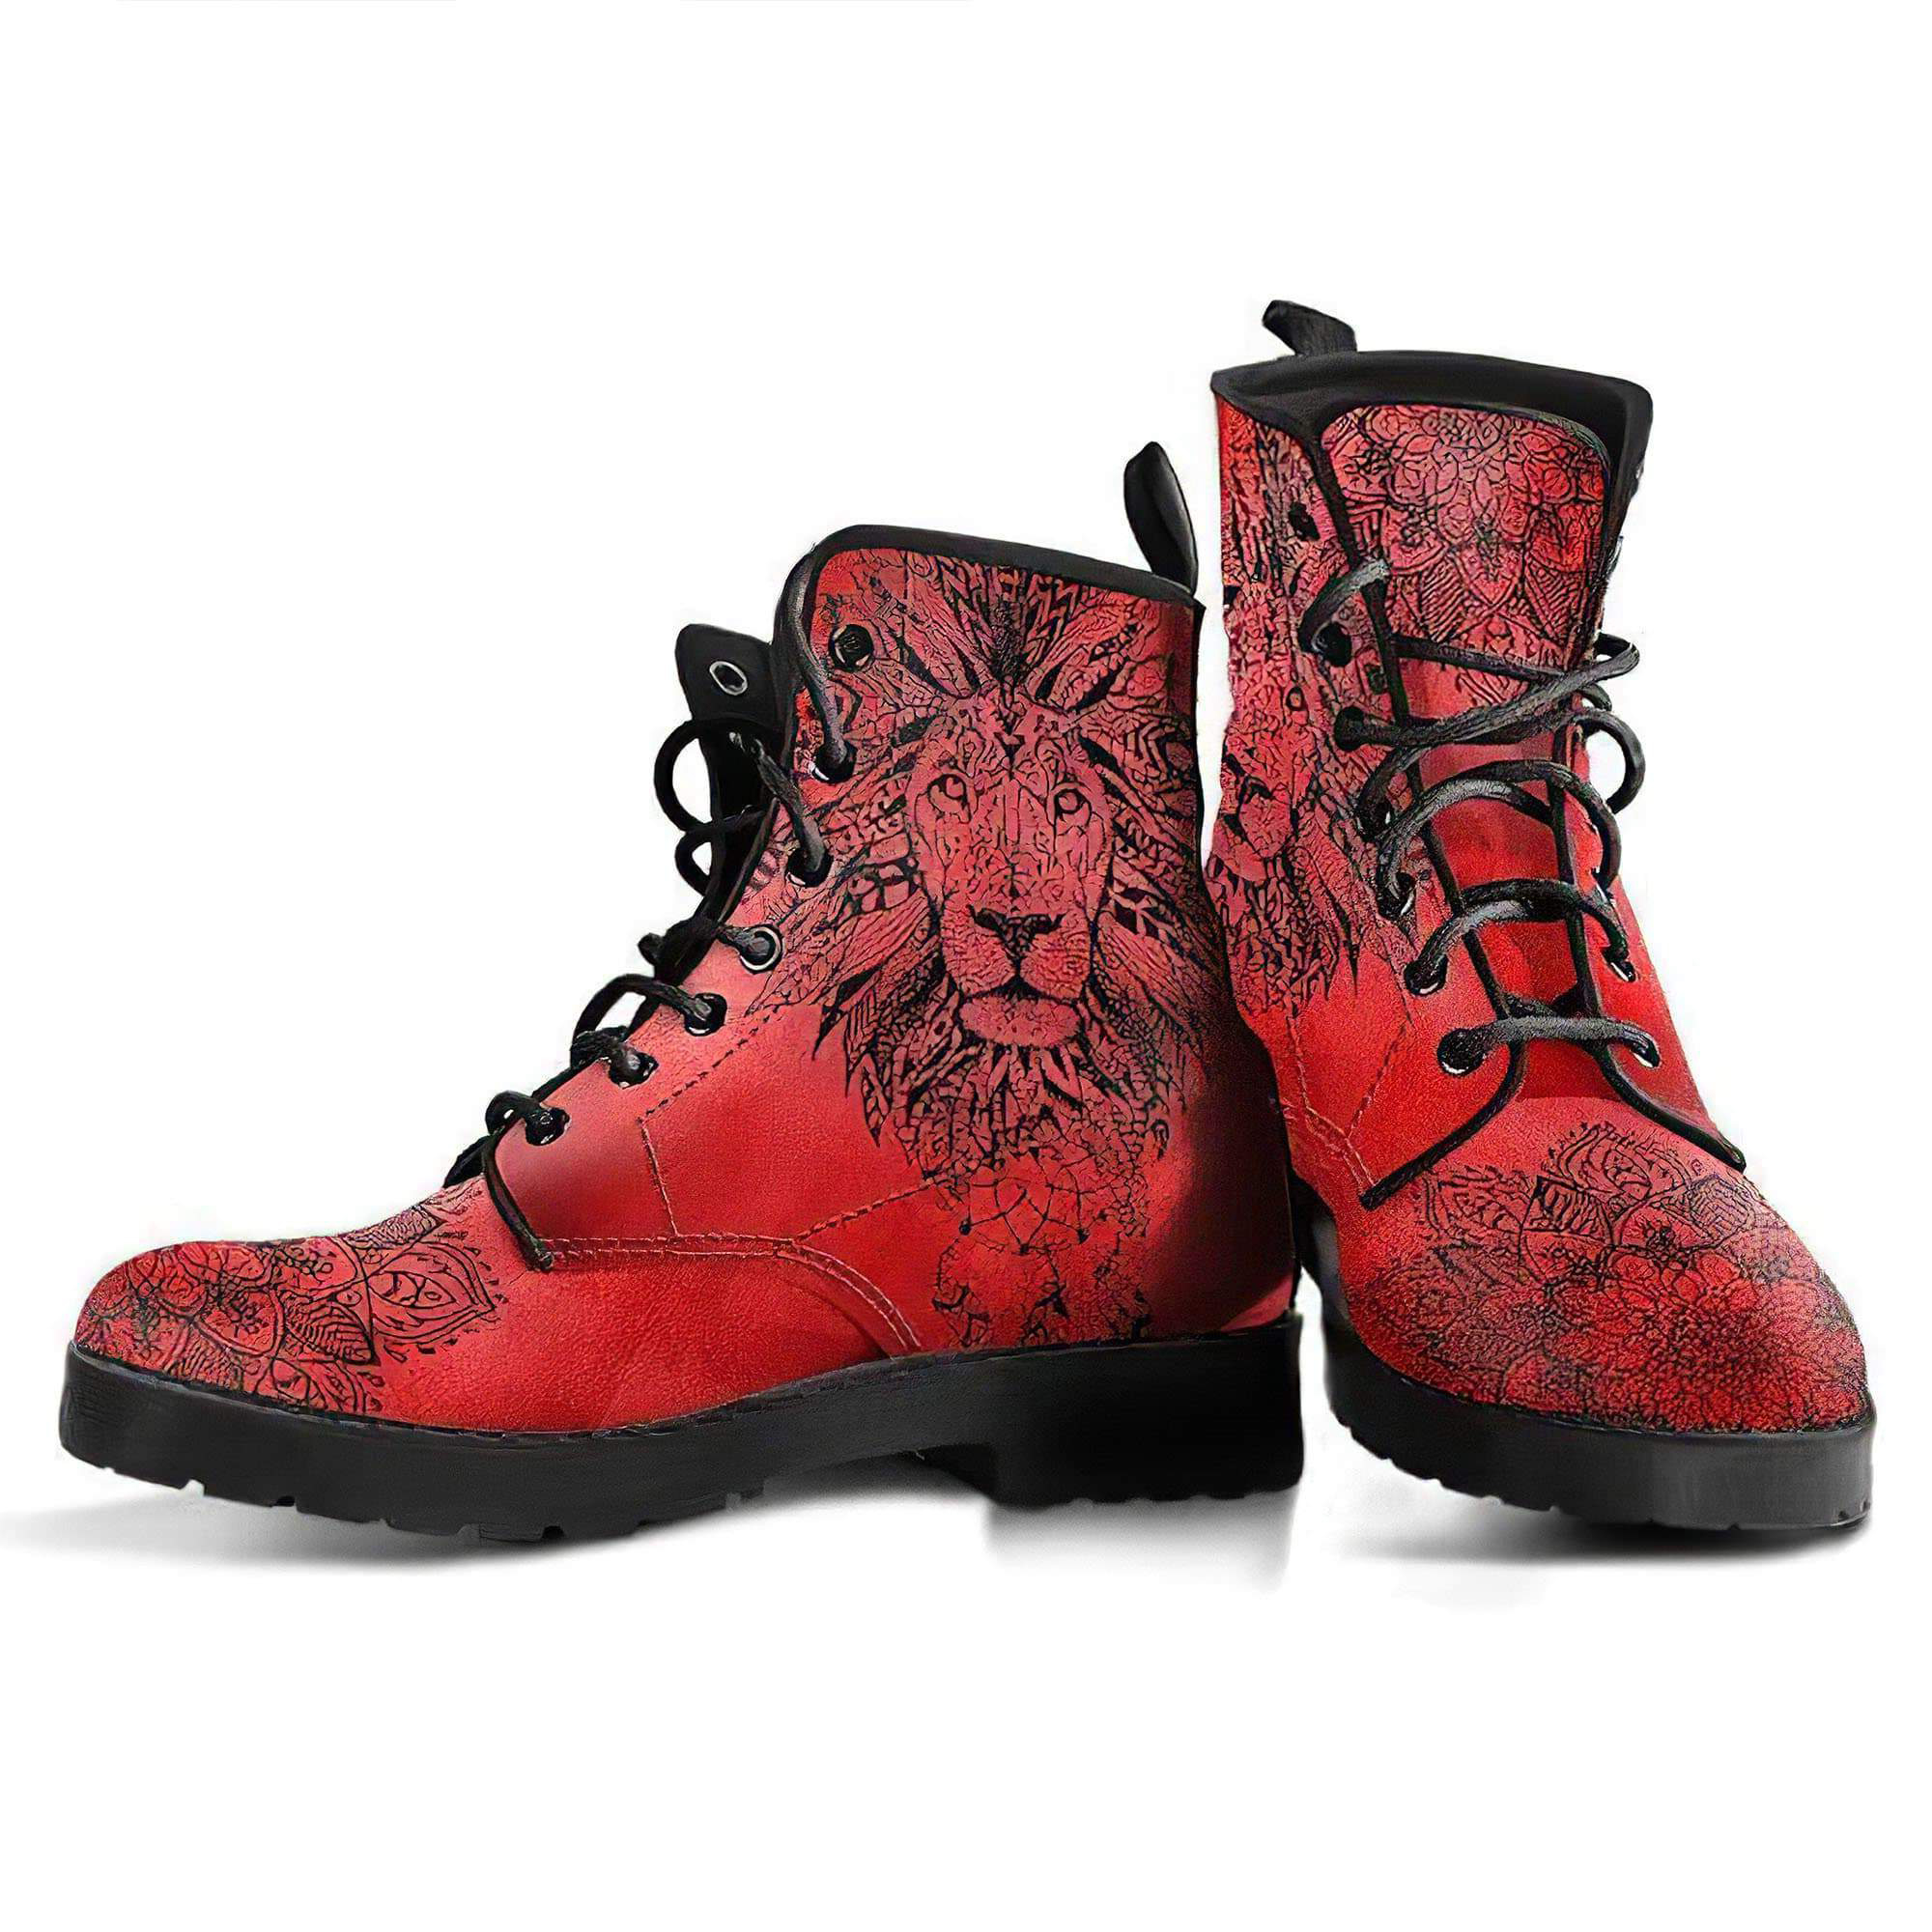 red-lion-handcrafted-boots-women-s-leather-boots-12051943489597.jpg